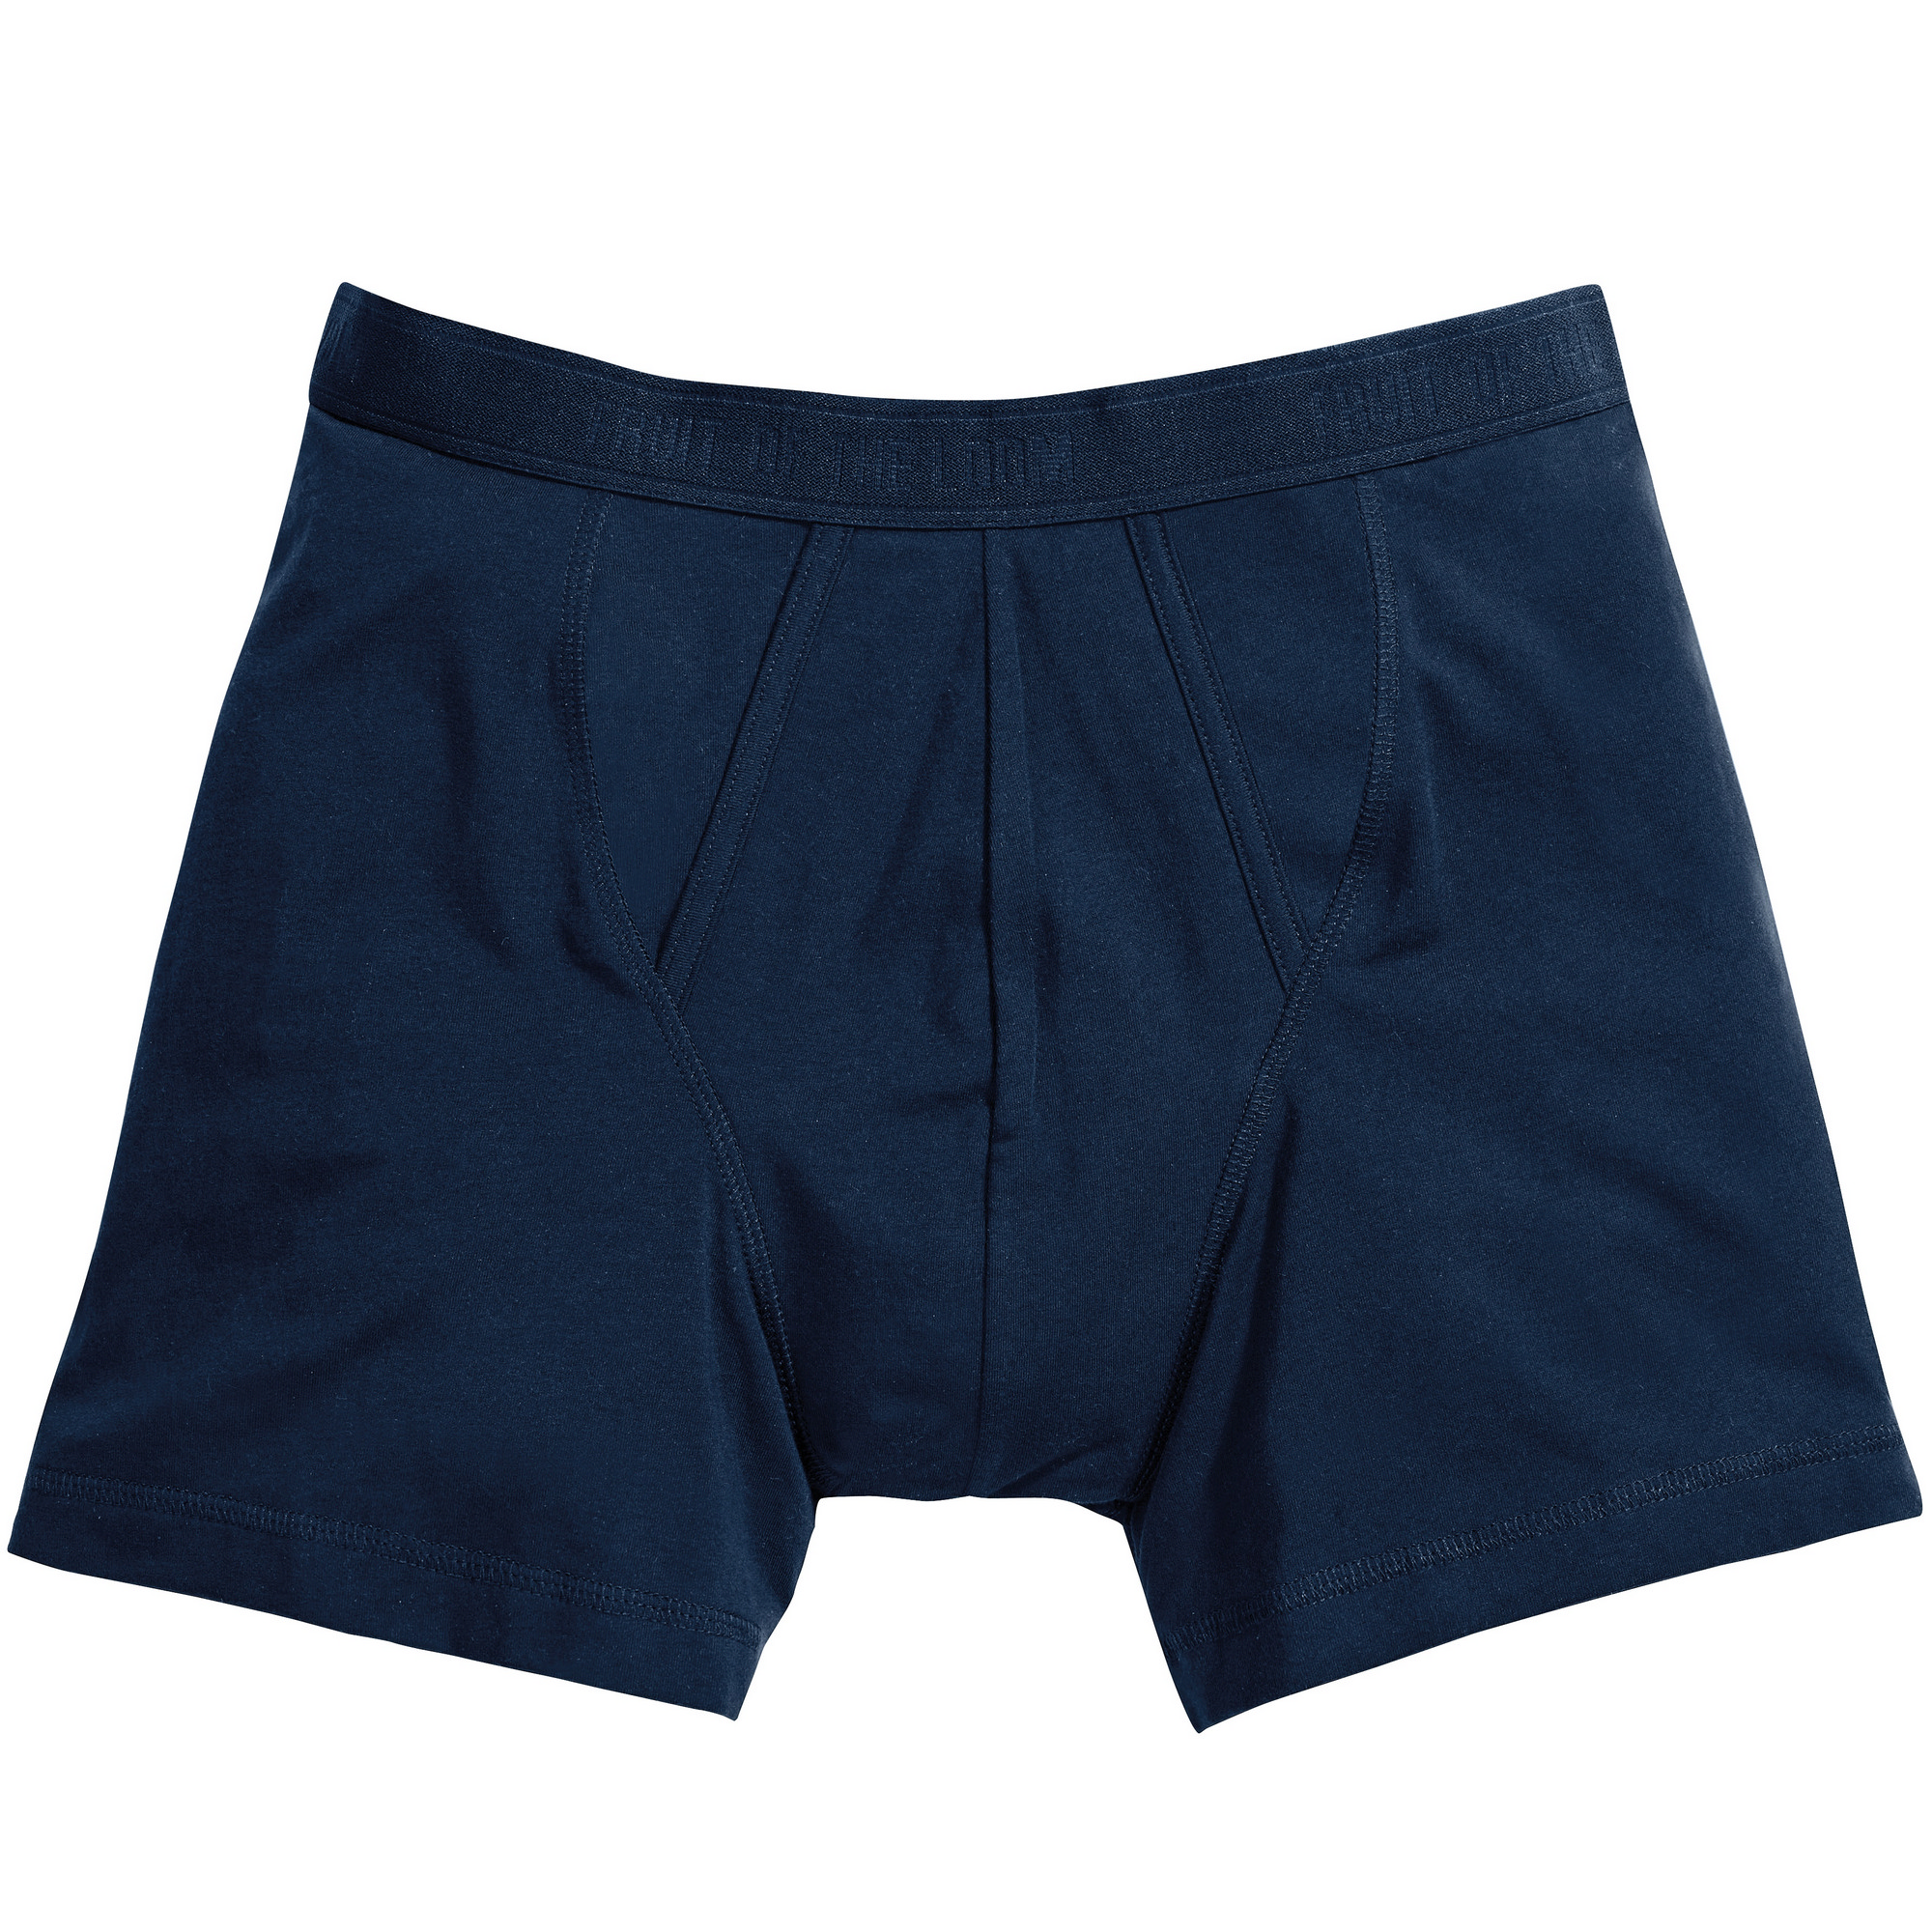 Calzoncillos Boxer Modelo Classic (pack De 2). Fruit Of The Loom  MKP